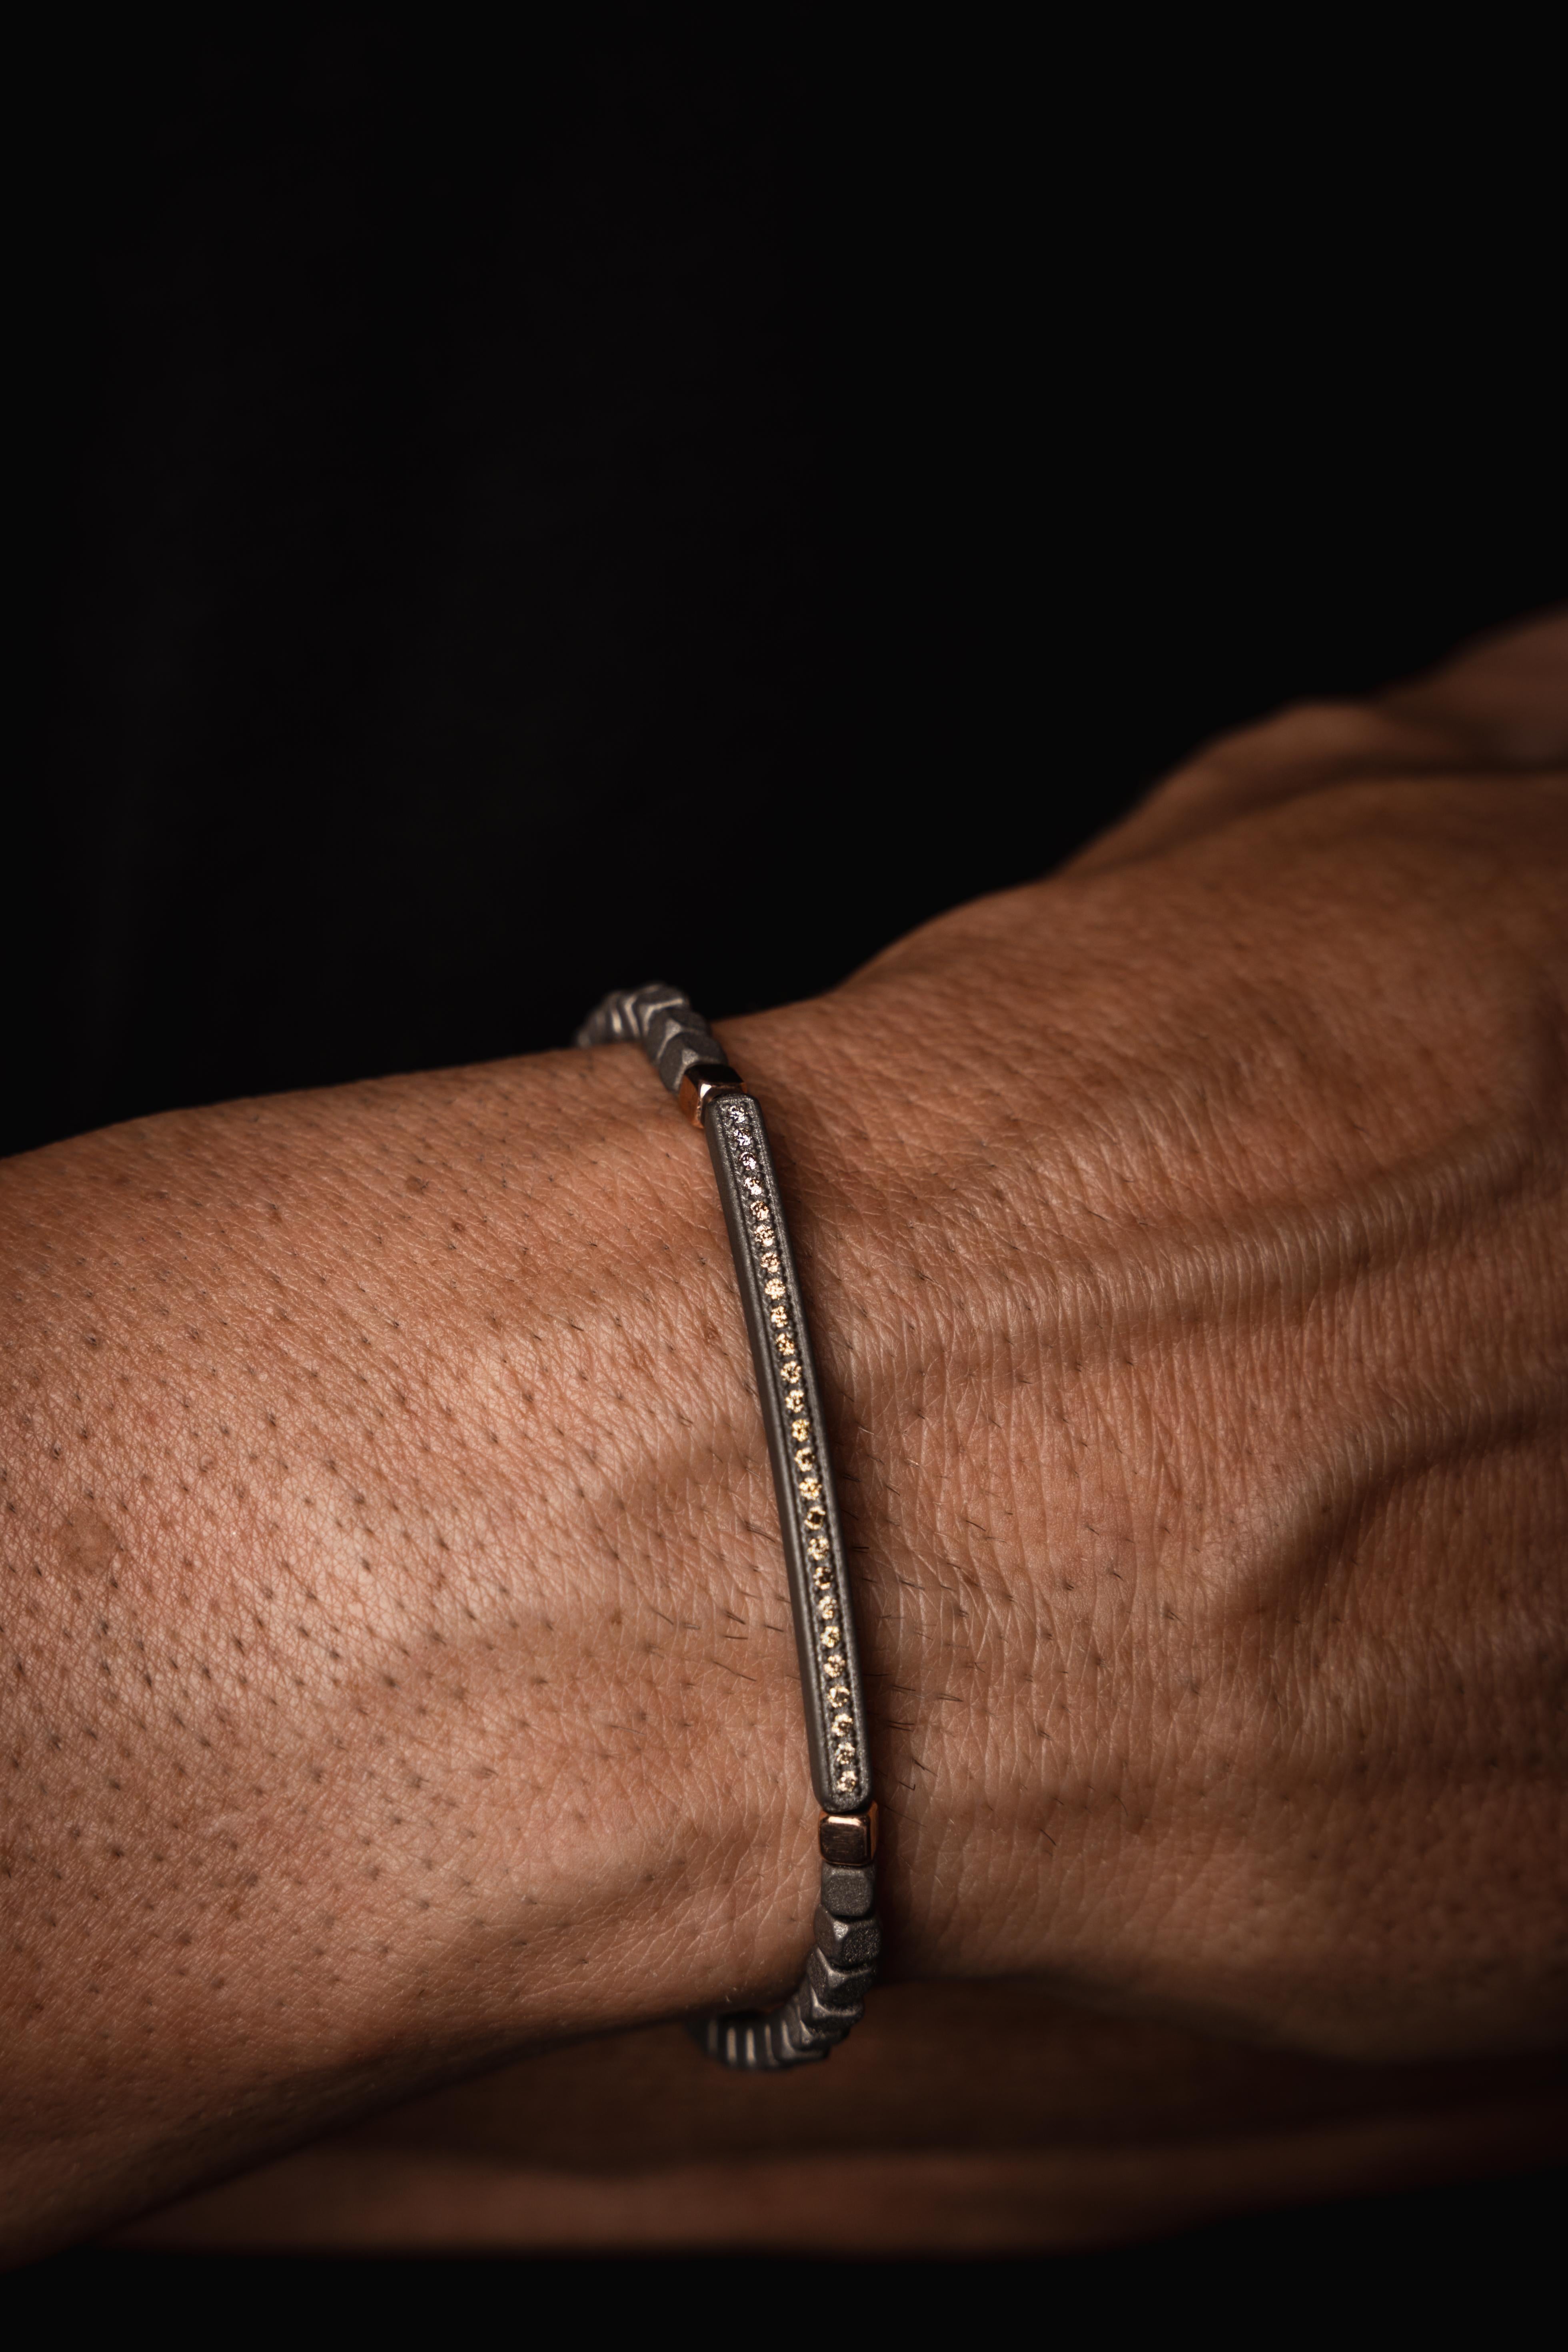 Men's titanium bracelet, 25 white diamonds, 2 9 kt red gold cubes at the ends of the bar and 9 kt red gold rings with 9 kt red gold clasp and a titanium cornet dangling from the last ring. A titanium bar, on which 25 1-point white diamonds are set